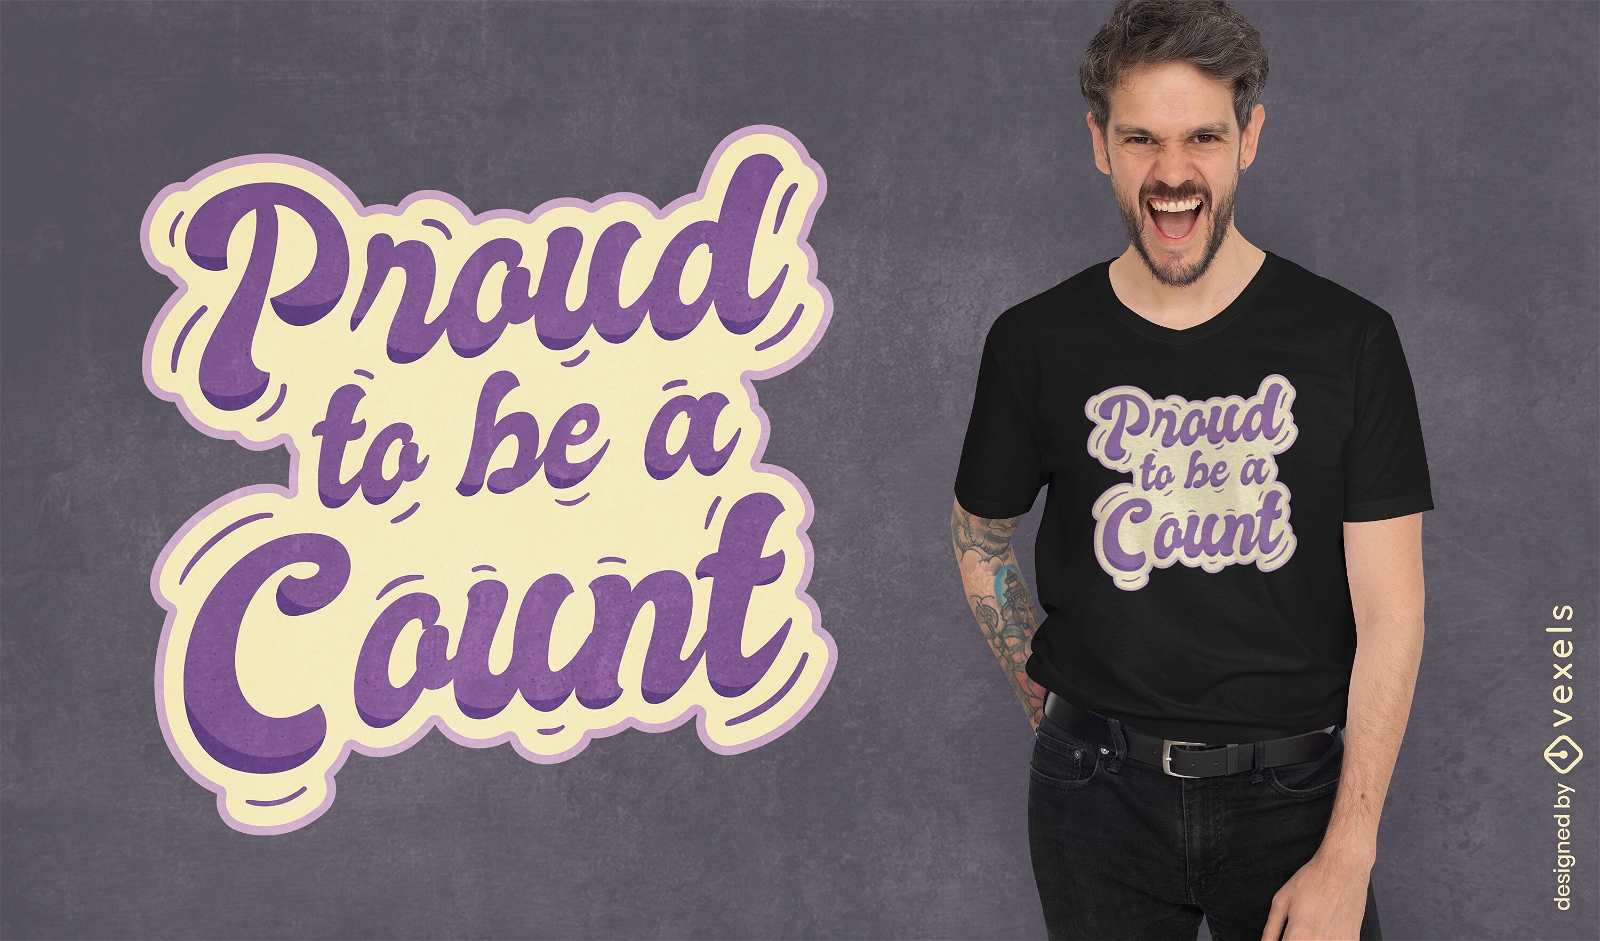 Produd to be a count design t-shirt